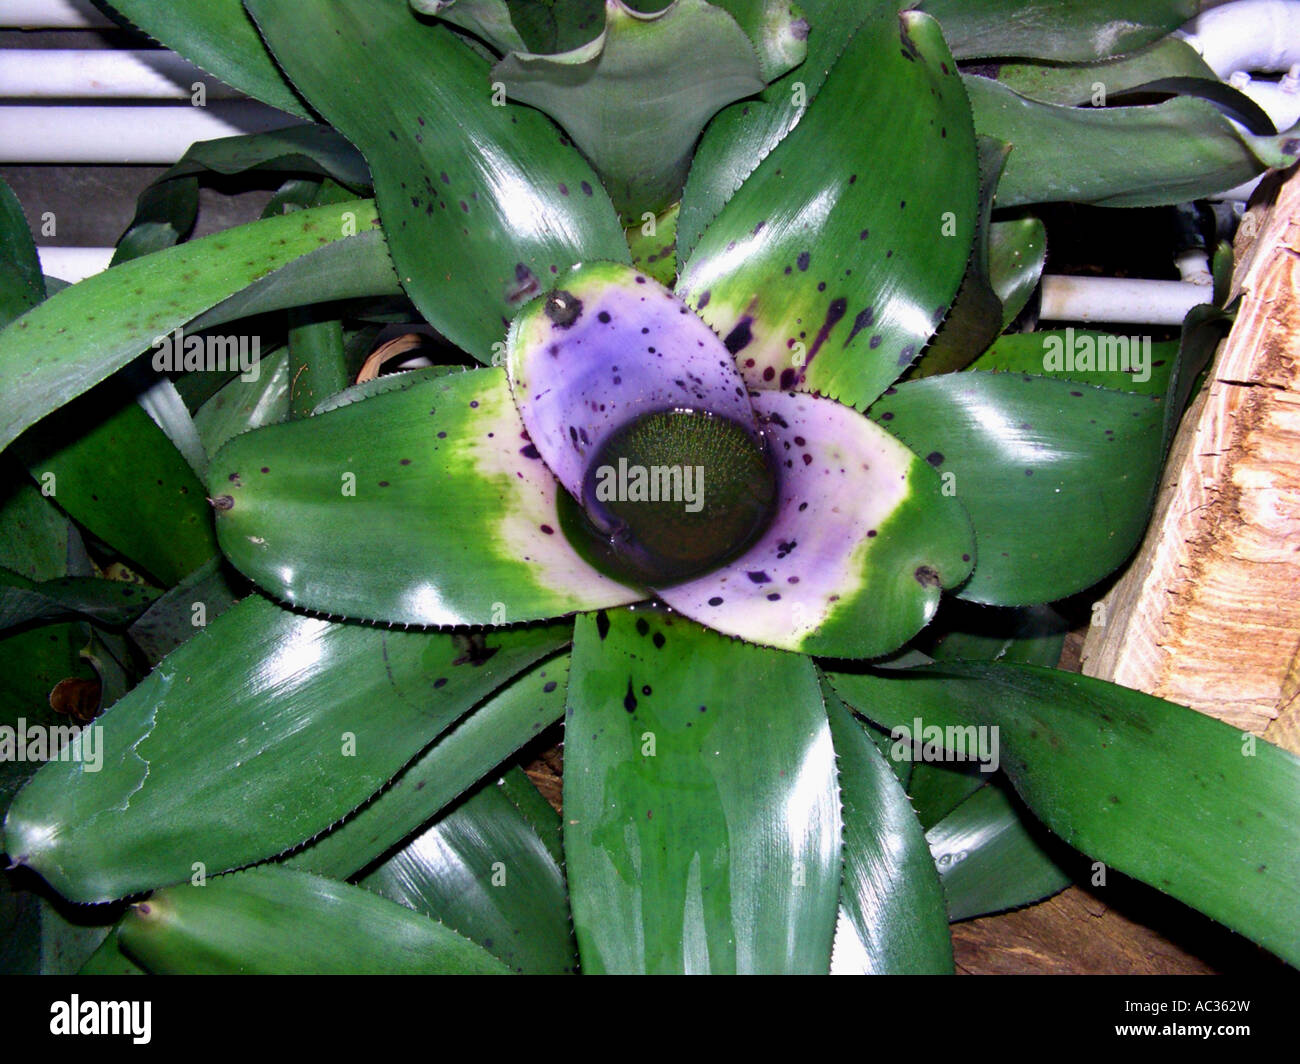 Neoregelia concentrica (Neoregelia concentrica ' Plutonis', Neoregelia concentrica 'Plutonis), leaf rosette with coloured bracts Stock Photo